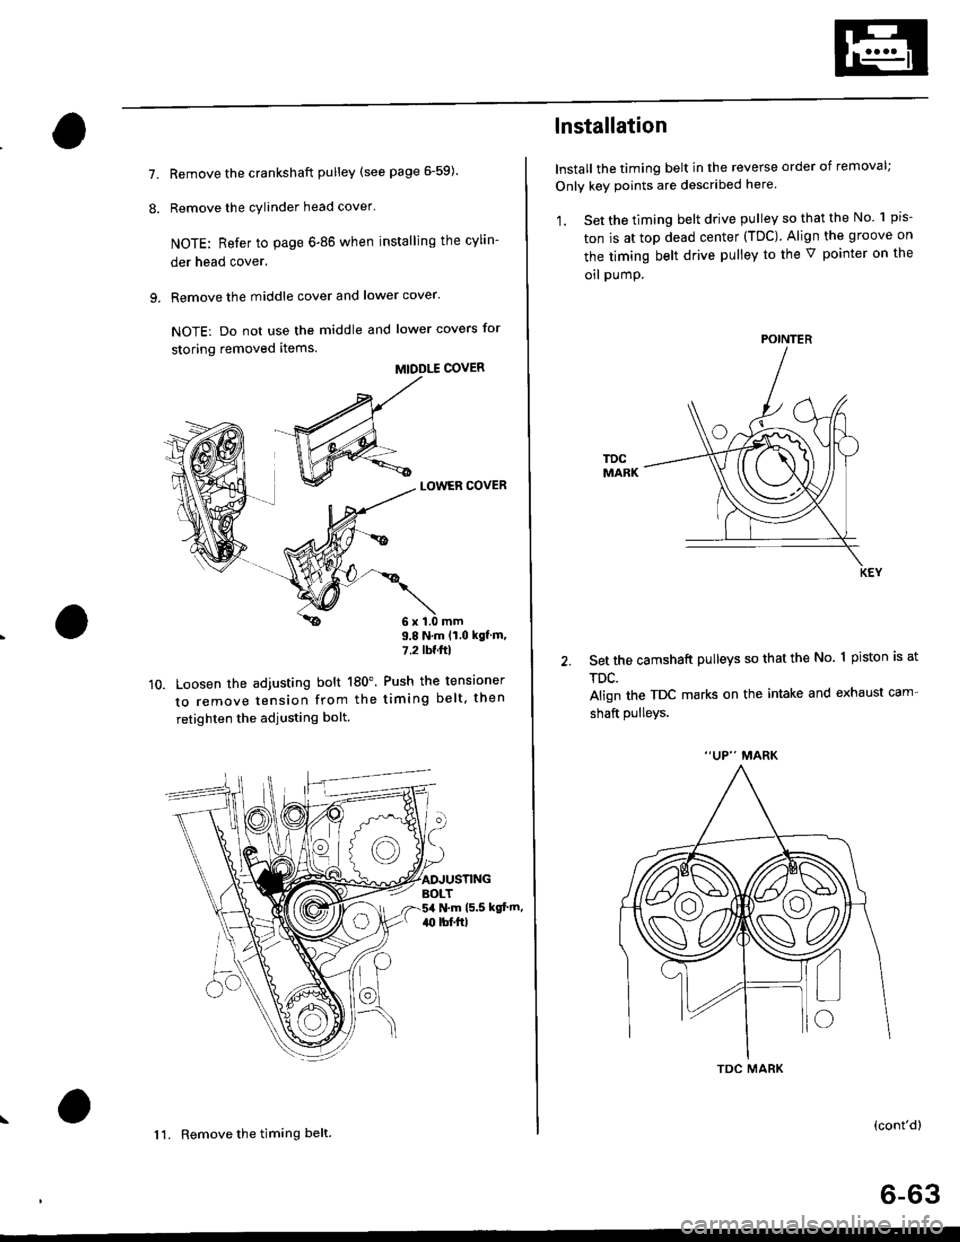 HONDA CIVIC 1998 6.G Service Manual 7.
8.
Remove the crankshaft pulley (see page 6-59).
Remove the cylinder head cover
NOTE: Refer to page 6-86 when installing the cylin-
der head cover.
Remove the middle cover and lower cover.
NOTE: D